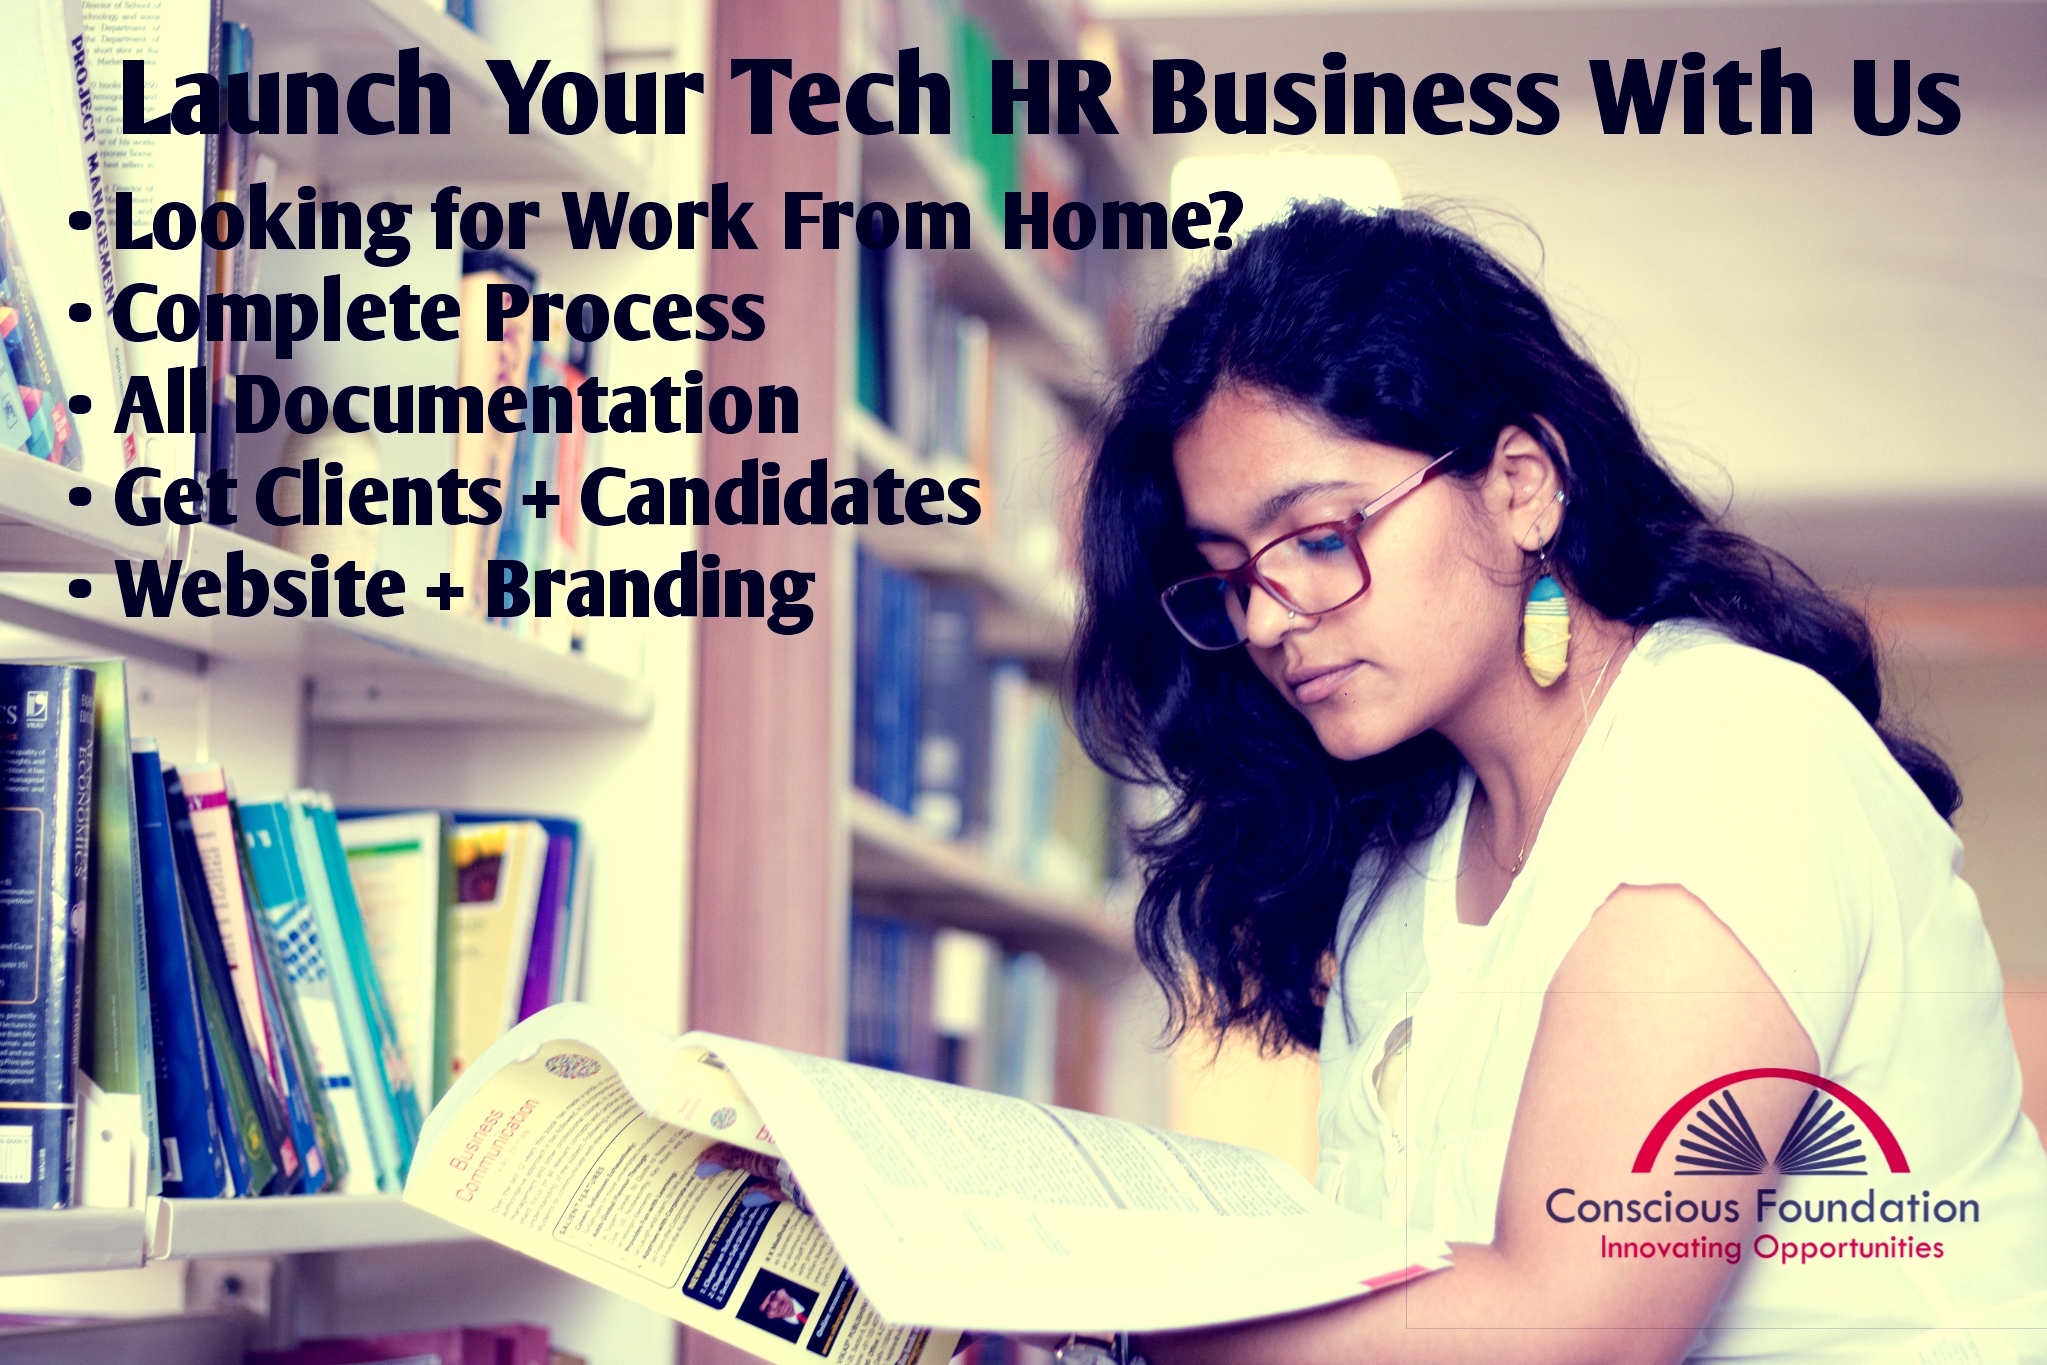 Launch-Your-HR-Business-with-us-Job-Site-job-portal-Conscious-Foundation-Staffing-recruitment